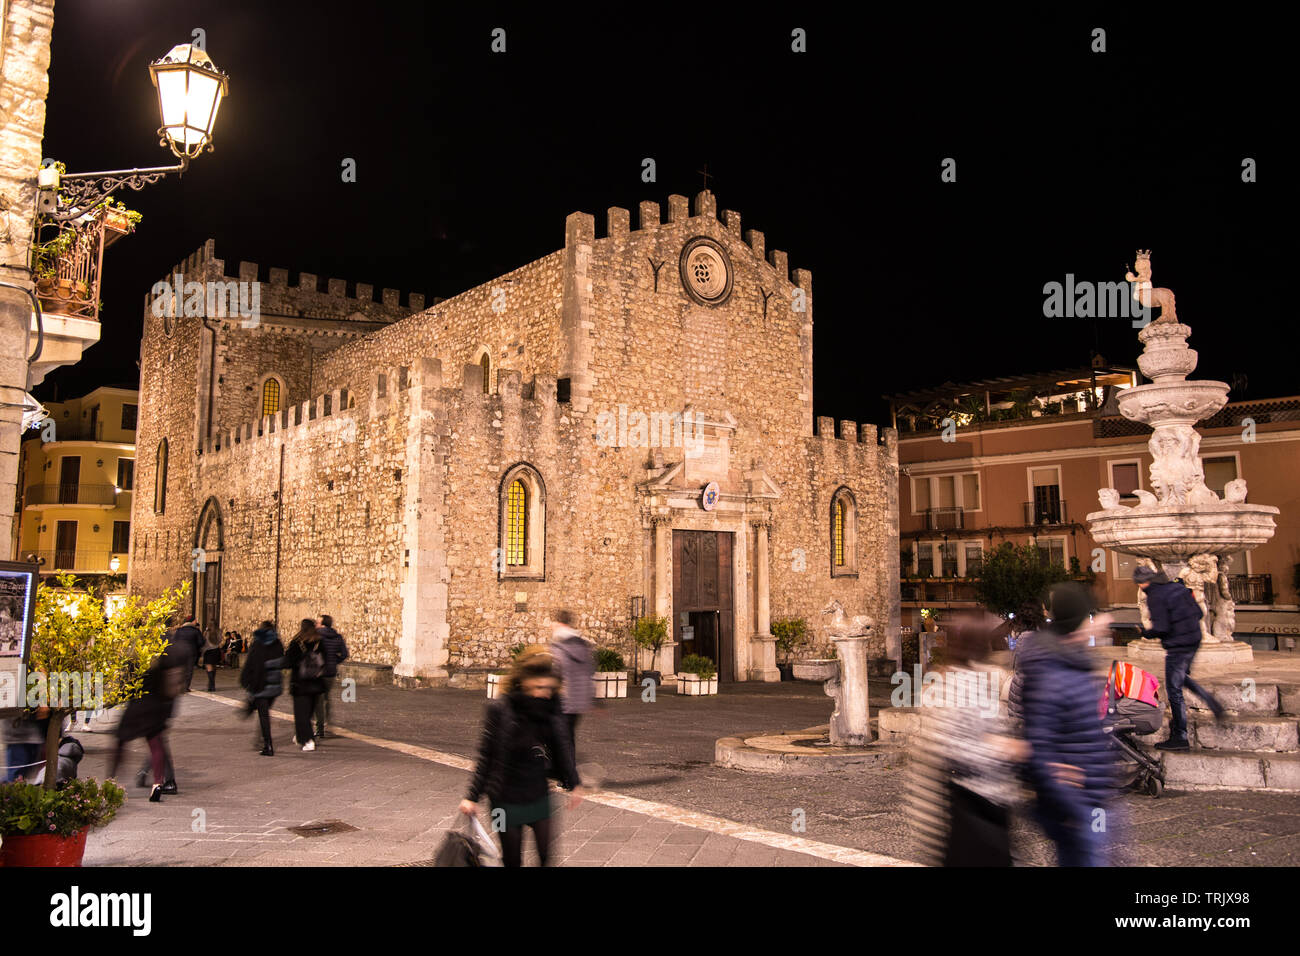 Part of the Grand Tour, Taormina was one of the well known destinations among the Central Europeans. Today, winter is still a good option for a visit. Stock Photo